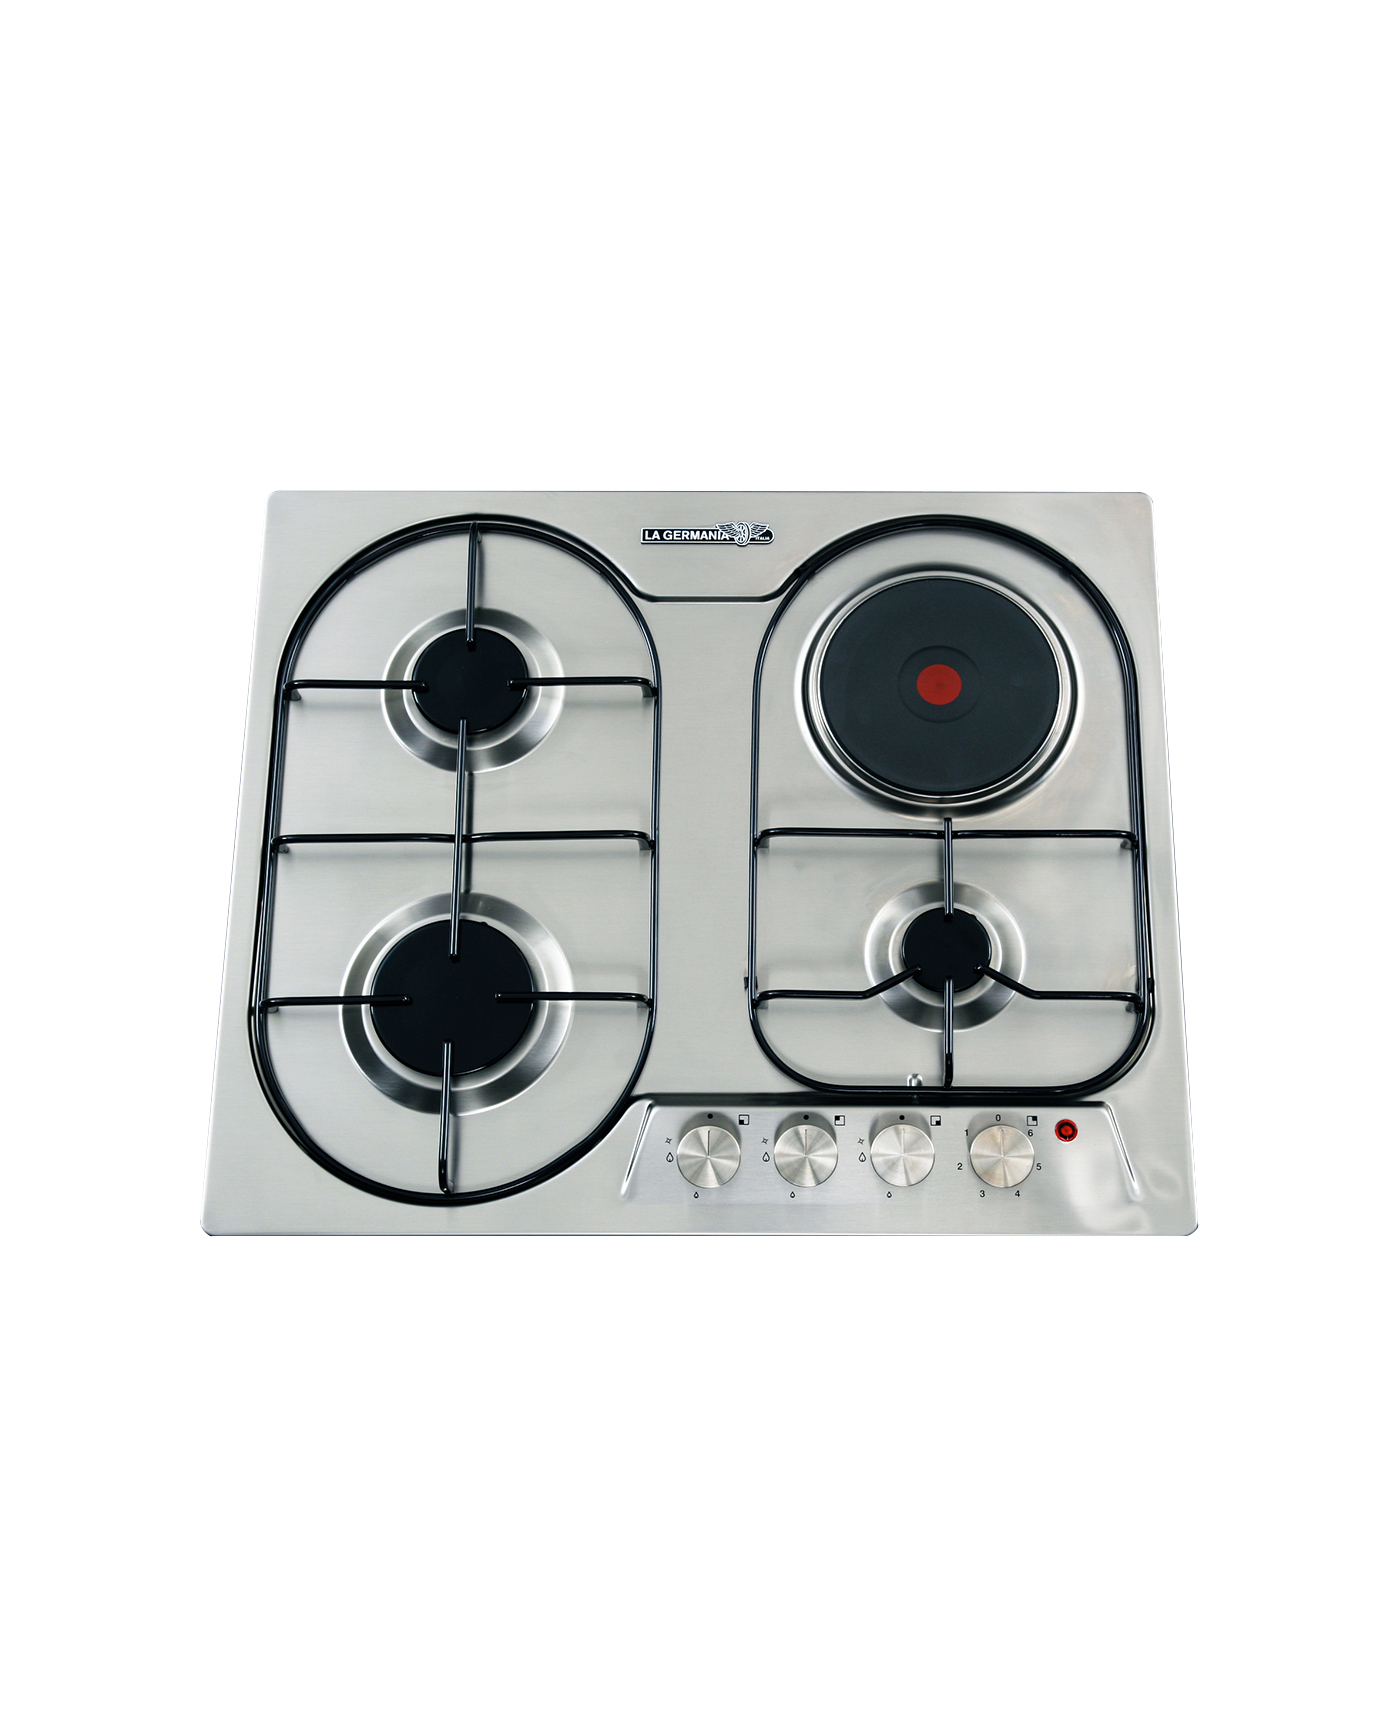 P905INE LA GERMANY 5 FIRE GLASS CERAMIC INDUCTION COOKTOP 88 CM